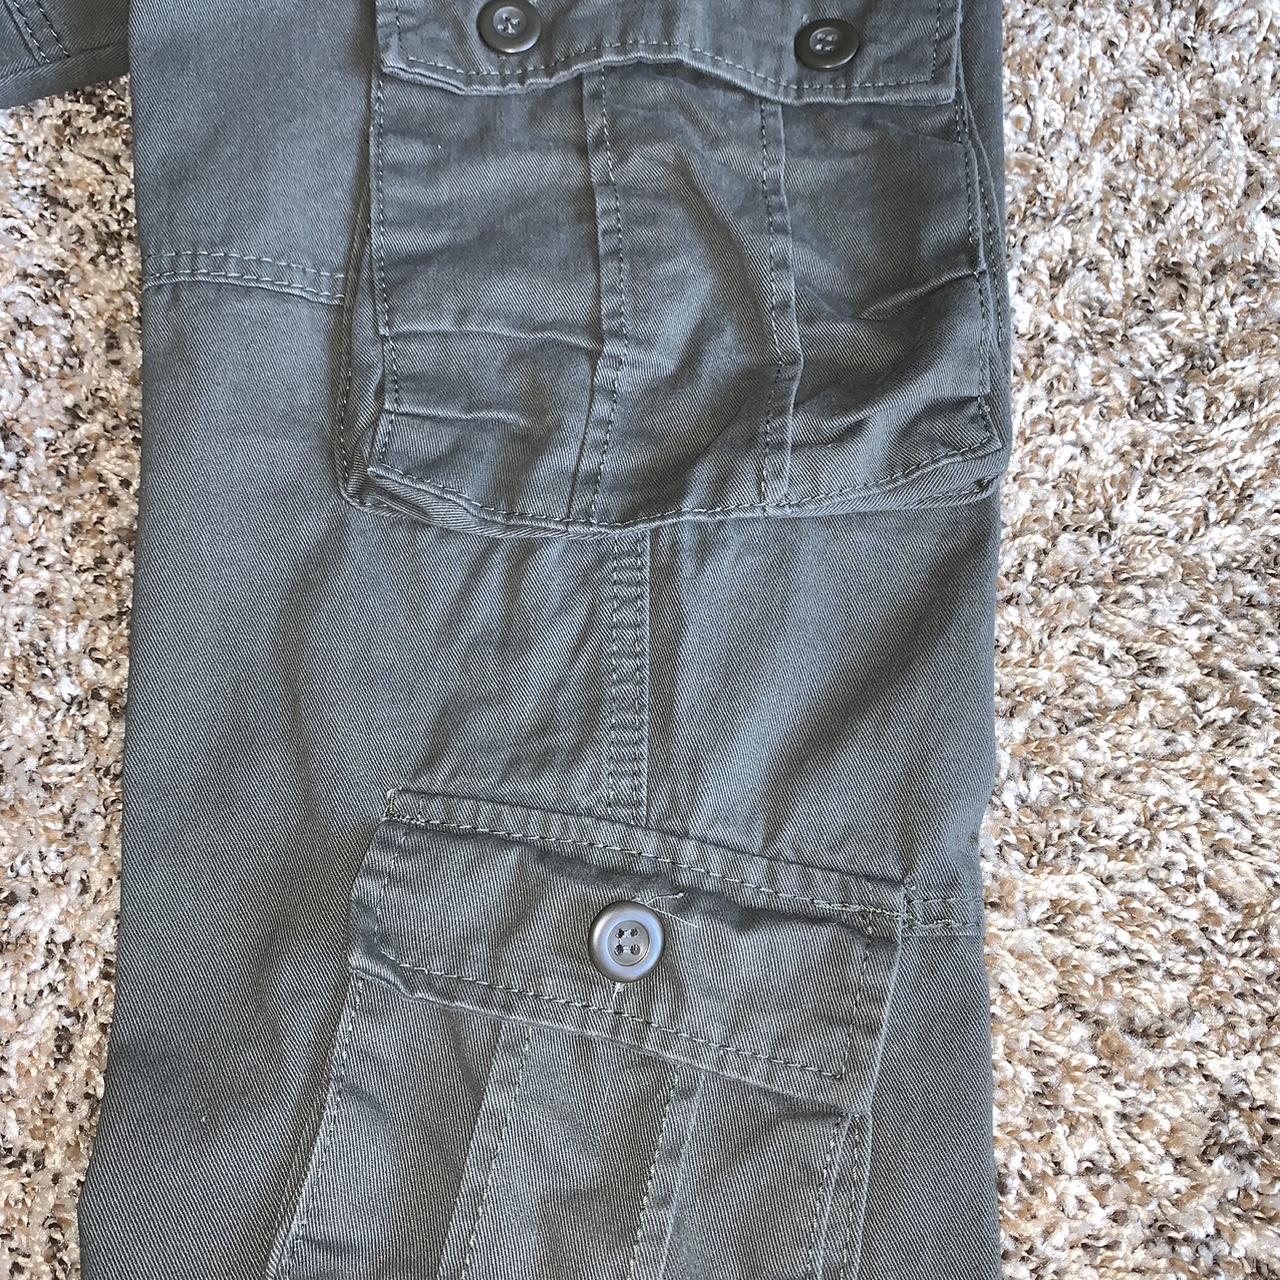 Dark Olive Green Cargo Pants! hand-me-down and in... - Depop